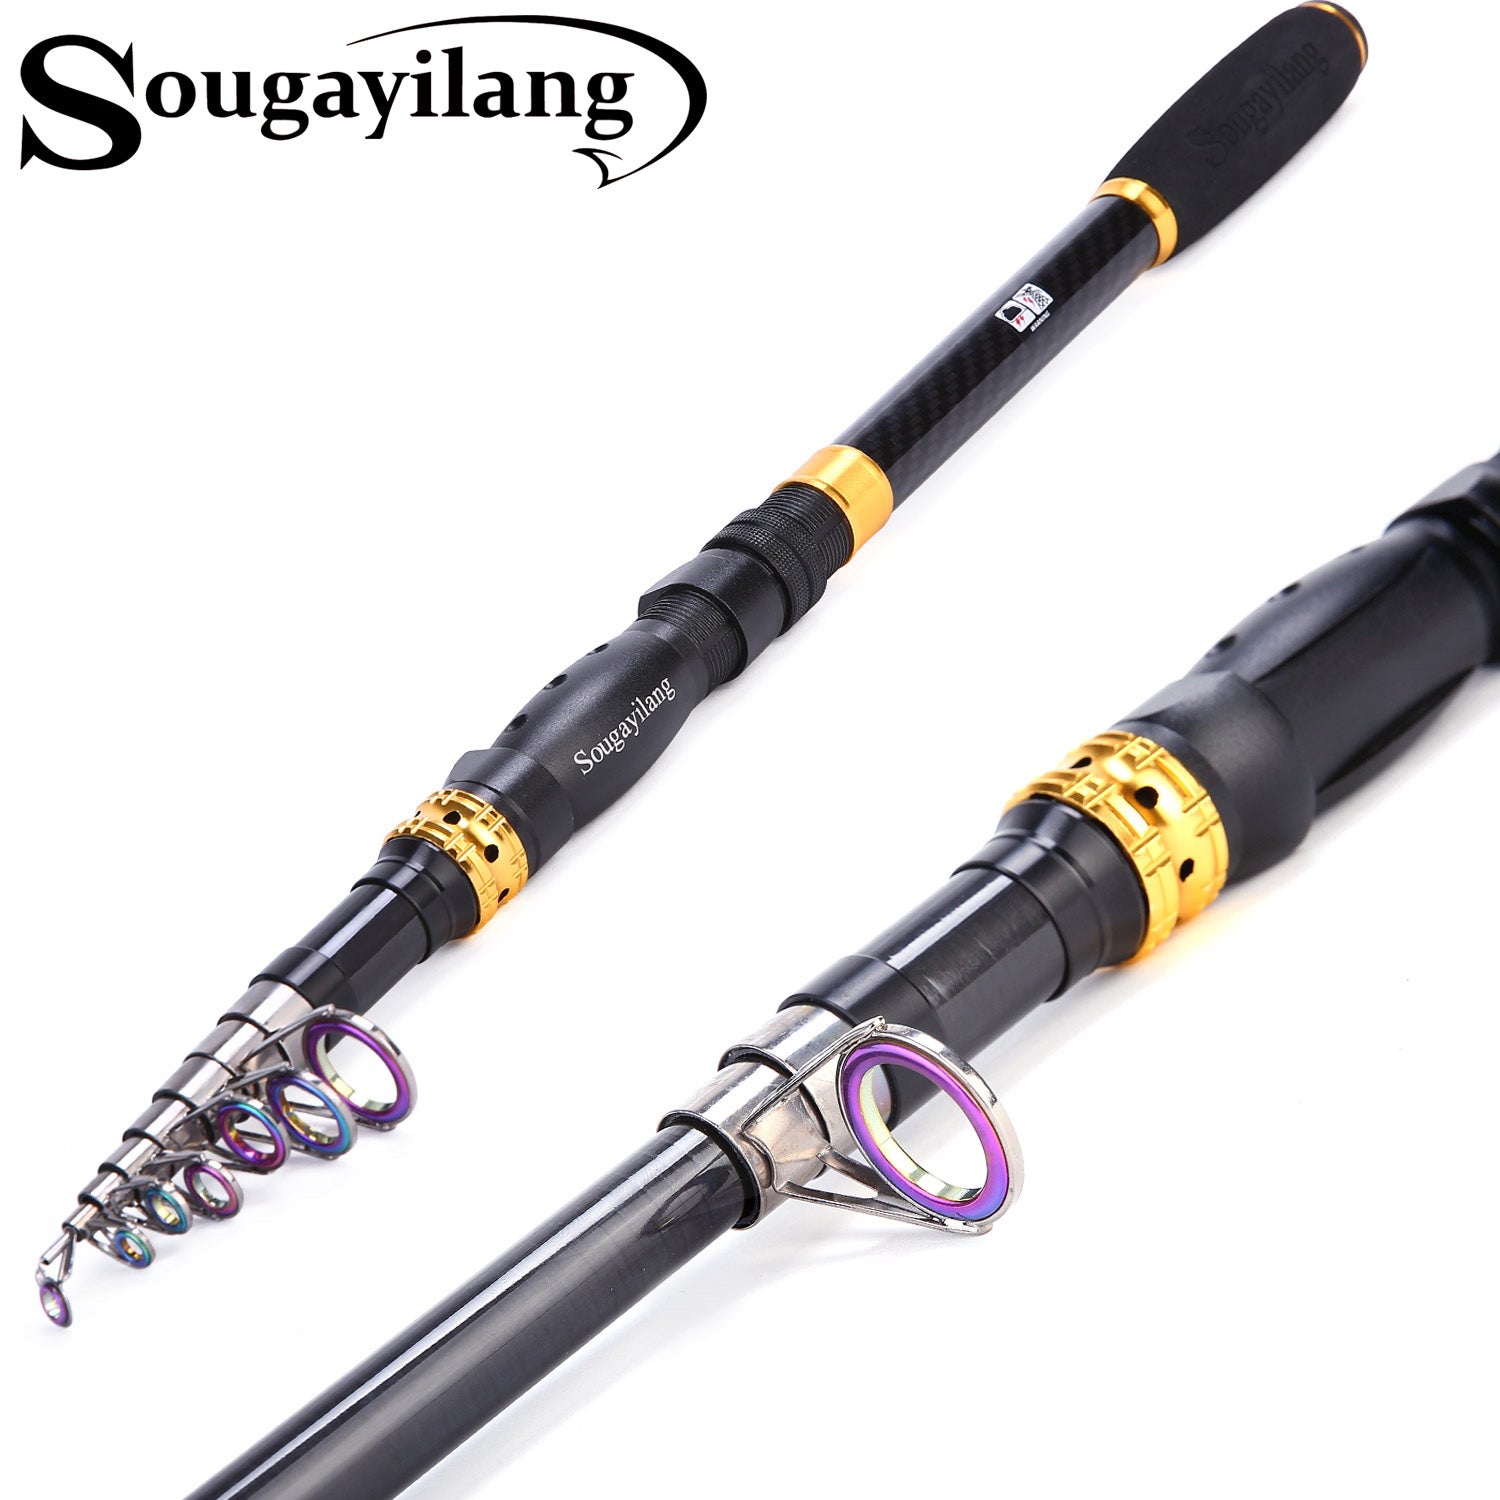 Sougayilang Fishing Rod, Carbon Fiber Telescopic Fishing Pole, Spinning &  Casting Rod Designed for Bass-Casting-Red-1.8M